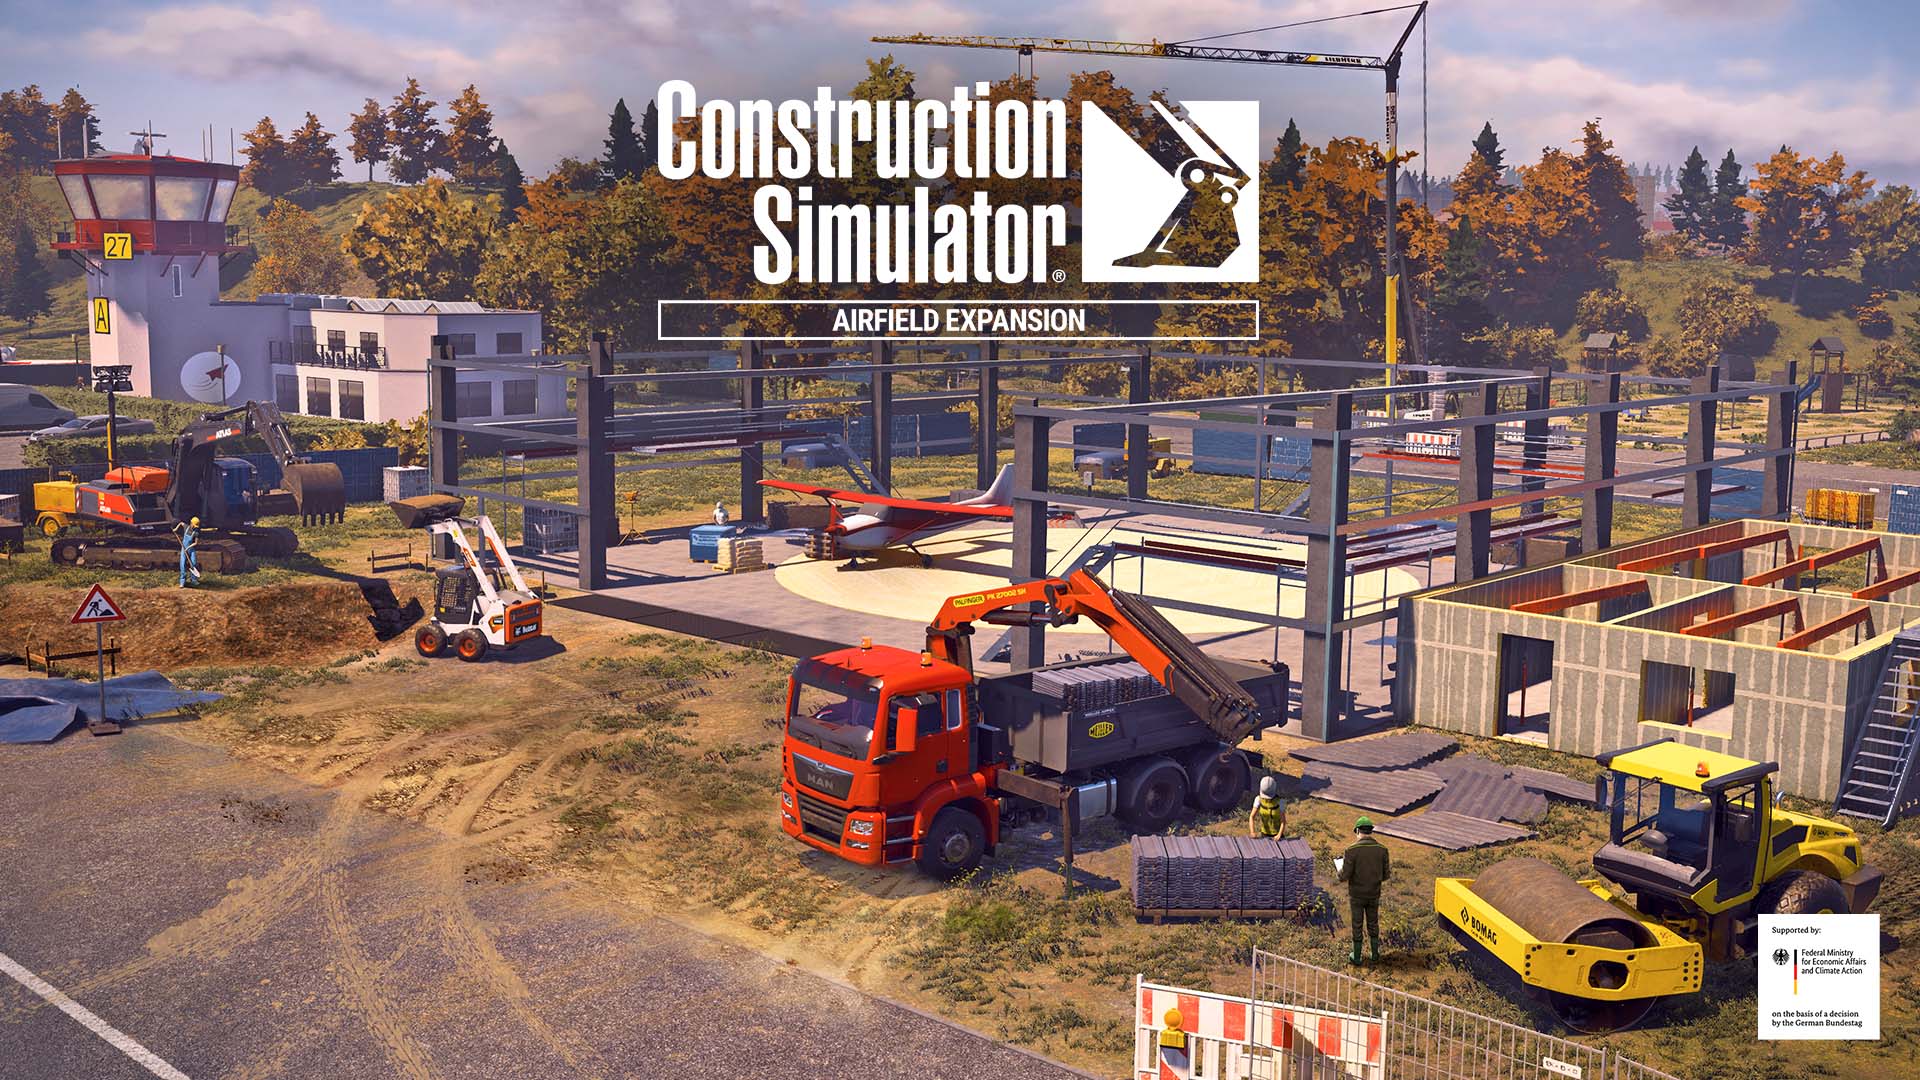 Construction Simulator - Airfield Expansion will be ready for take